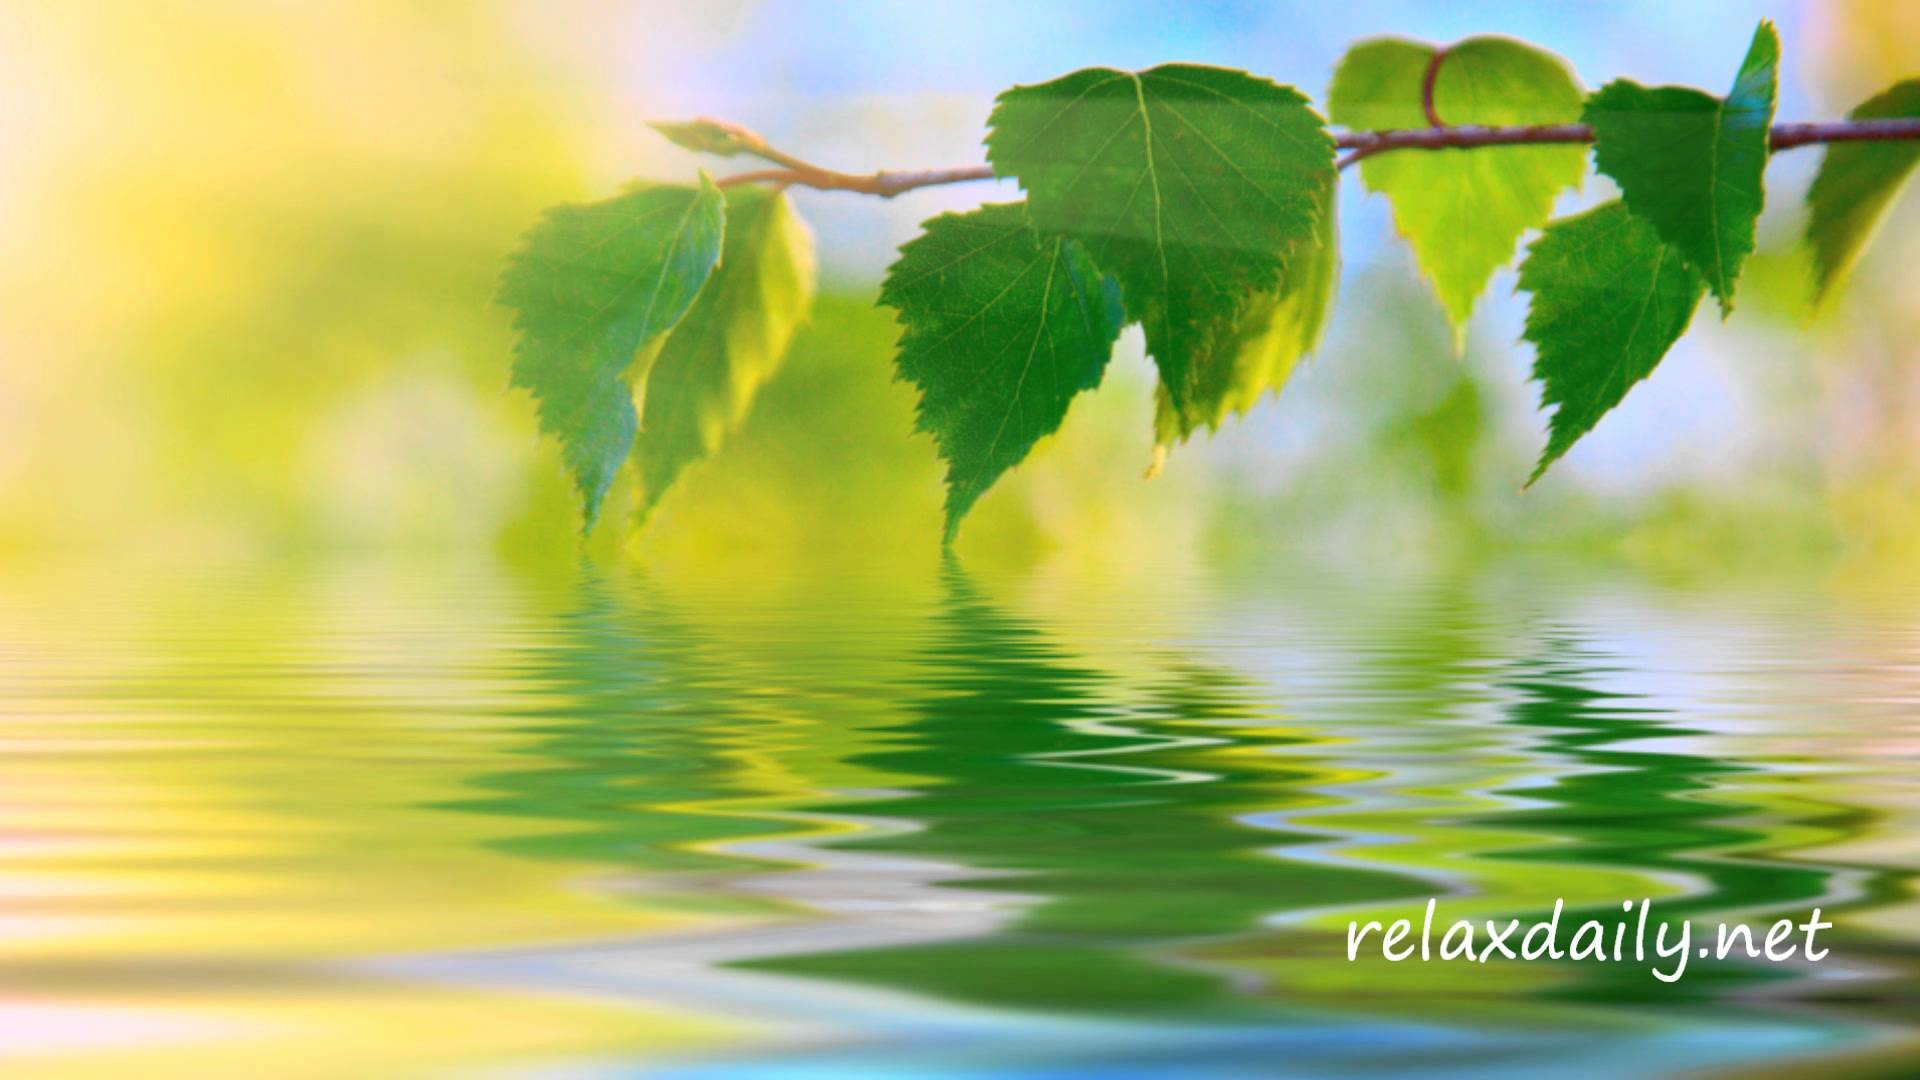 Calm Music   Slow Peaceful Background Music   relaxdaily N042